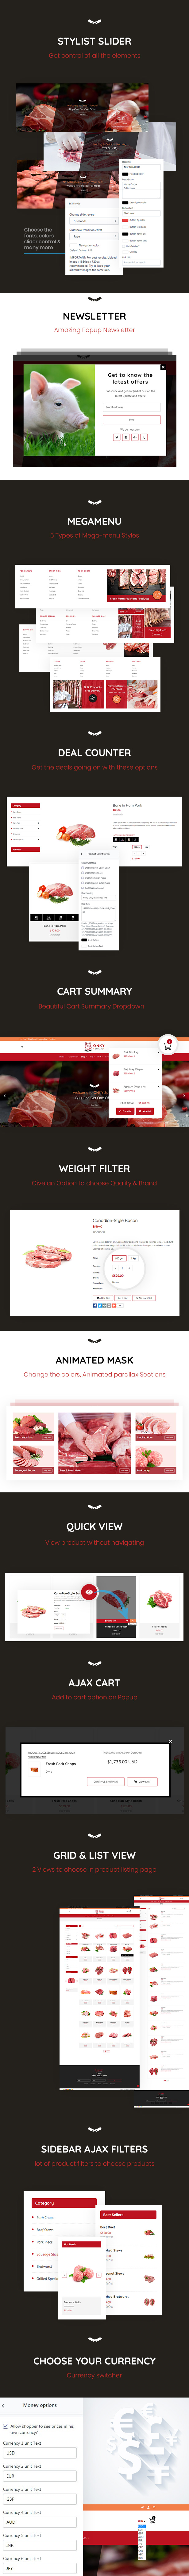 Onky | Butcher, Food and Meat Shop Shopify Theme - 3